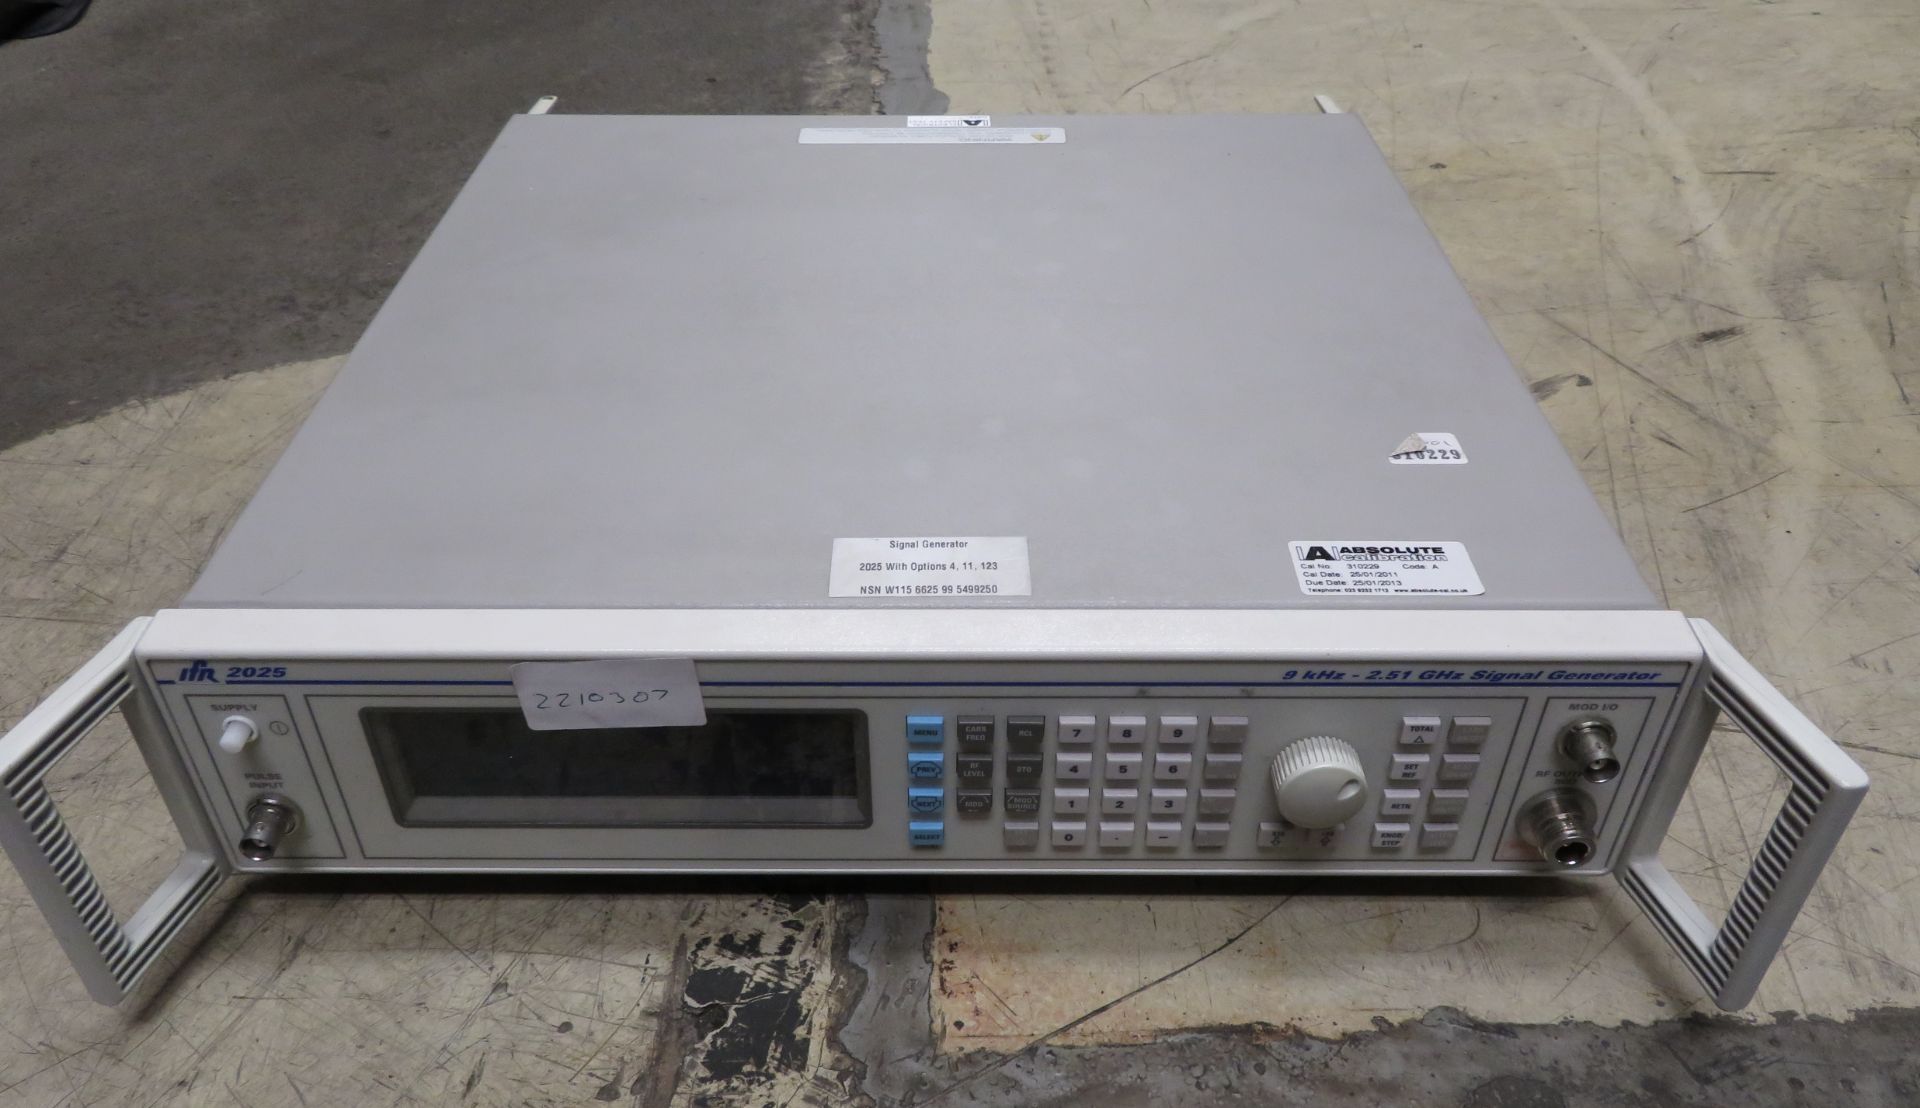 IFR 2025 9kHz - 2.51 GHz Signal Generator. - Image 4 of 5